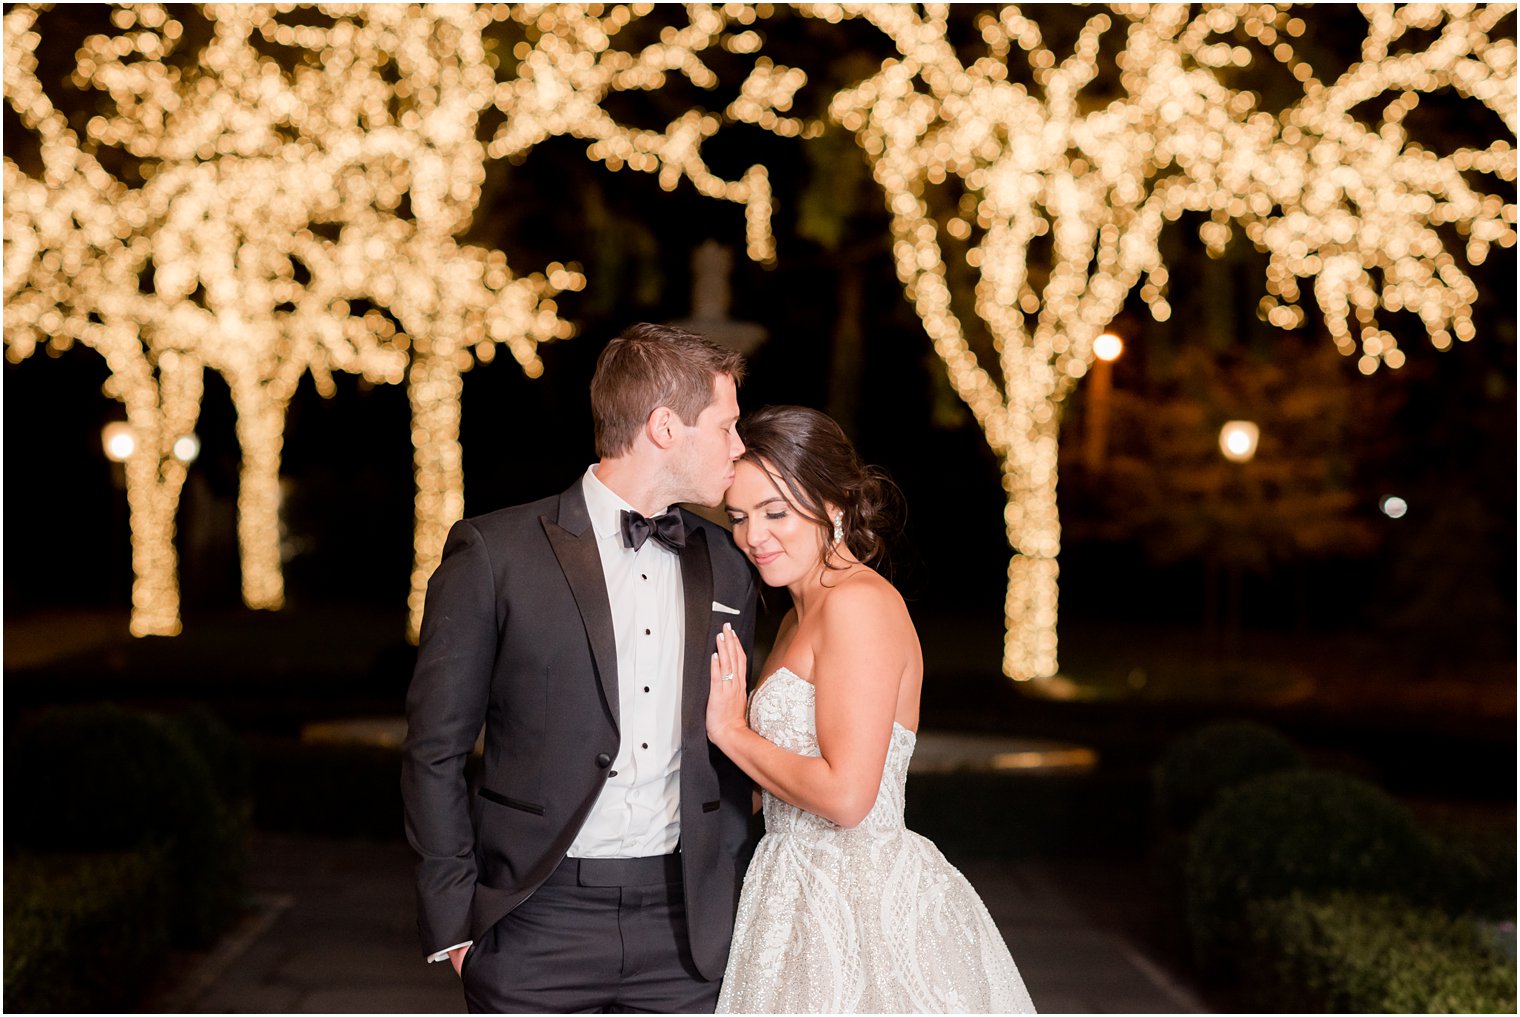 groom kisses bride outside Park Chateau Estate at night with trees in Christmas lights